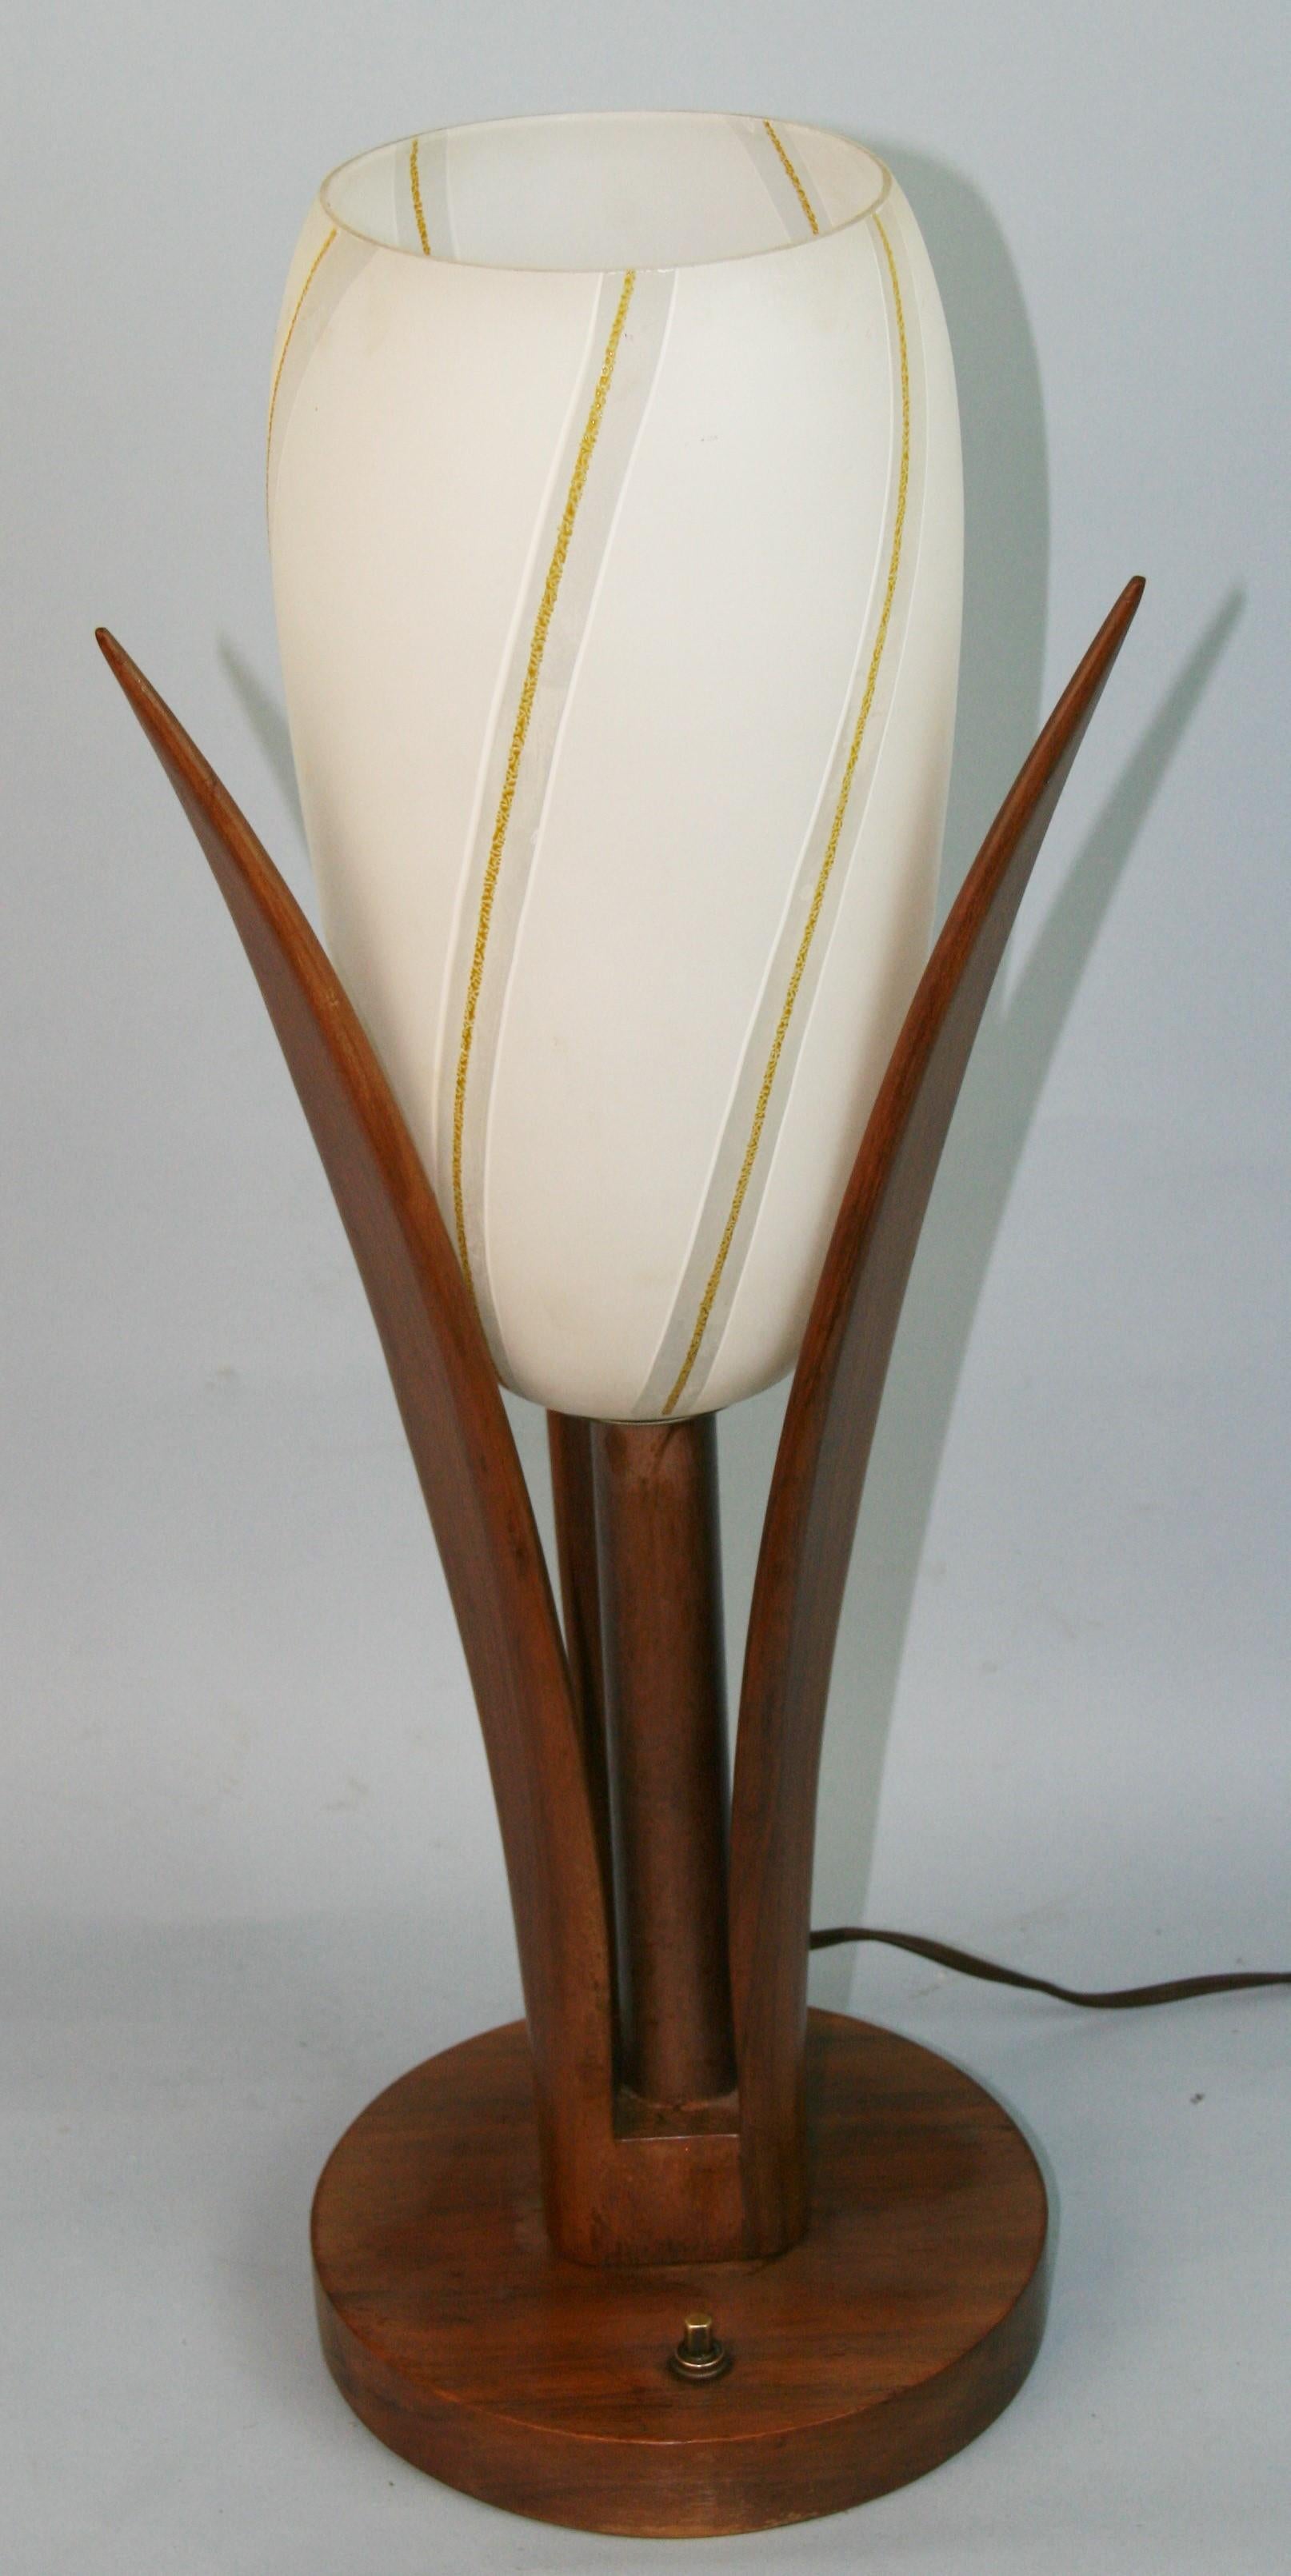 Mid-20th Century Scandinavian Teak and Glass Table Lamp 1960's For Sale